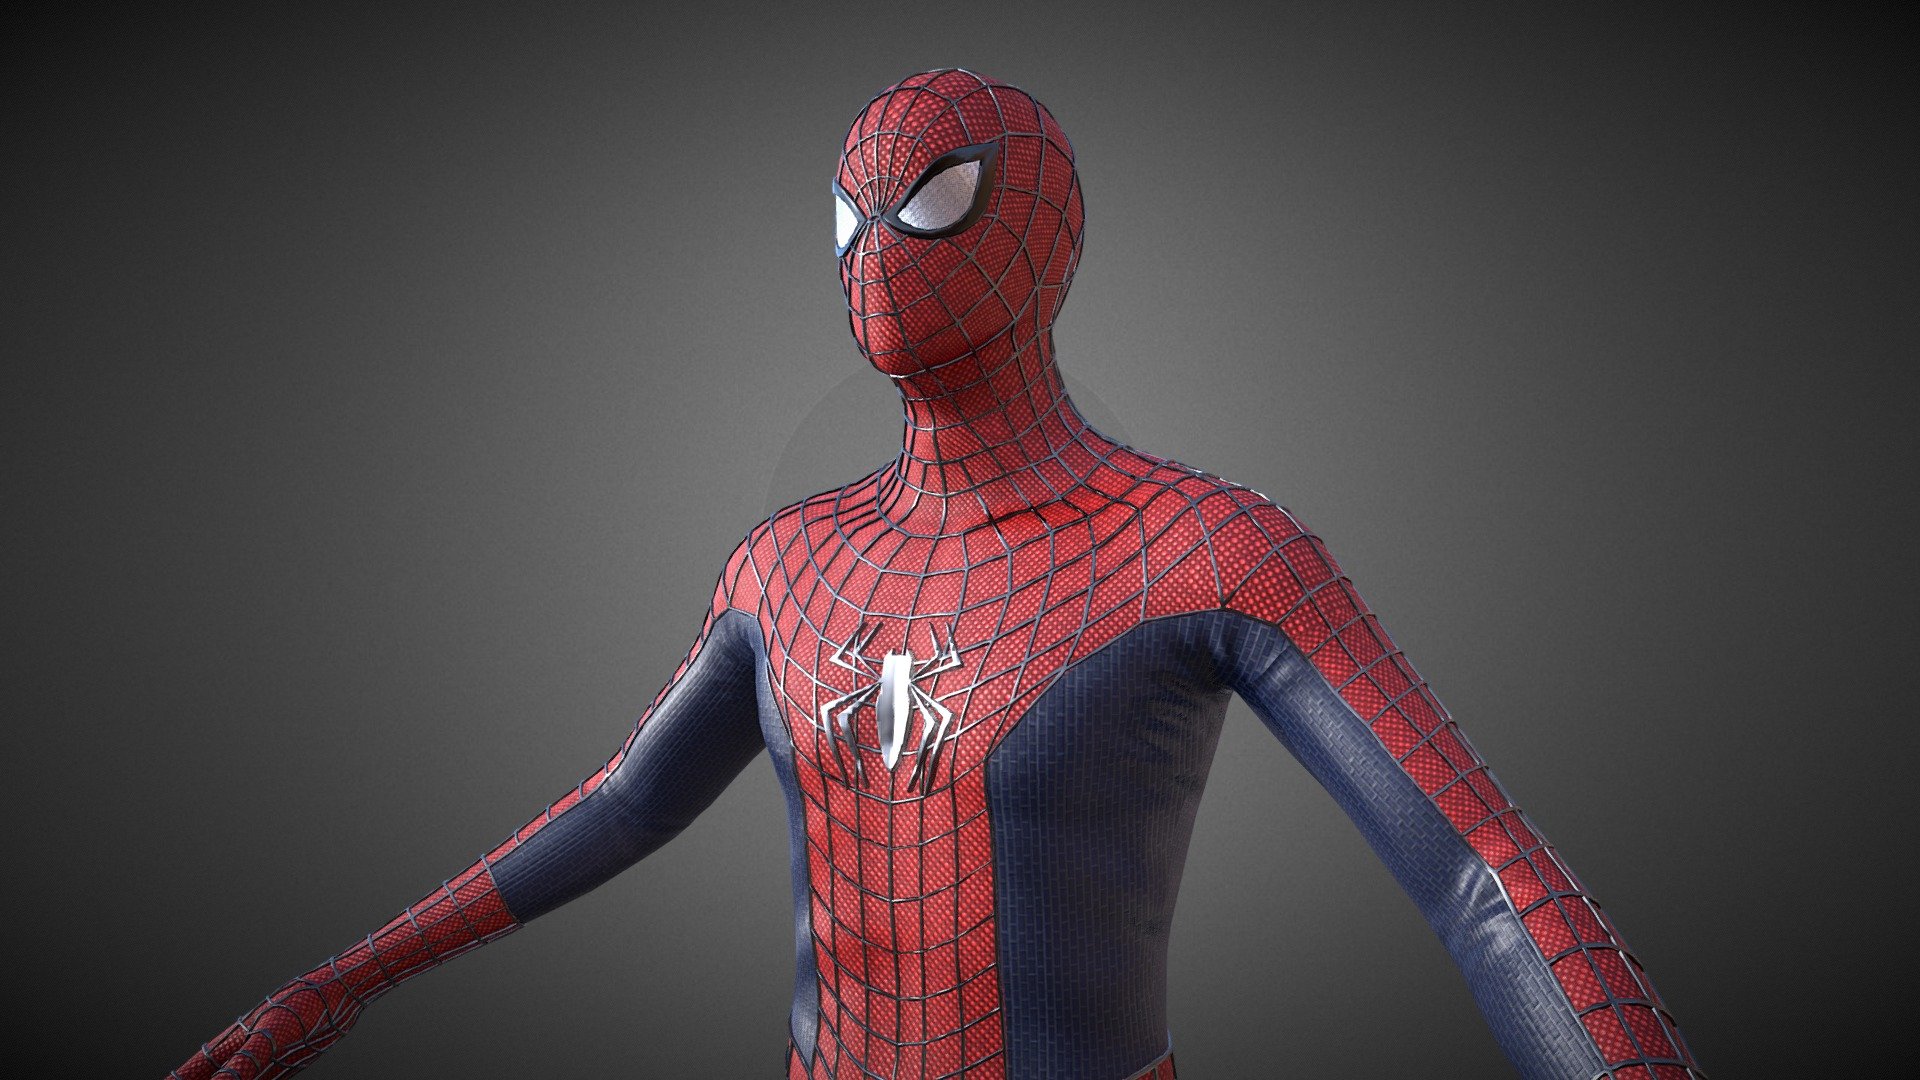 Product name: Spider-Man 3D Model

Classic-style, realistic looking Spider-Man 3D Model for animation and VFX. Model has realistic wrinkle details!

+High poly, Animation and VFX ready, rigged, PBR textures

+Total tris counts: 442,558

+Unit: centimetres. Model Height: 178cm approx.

+Includes 2 different .blend files: Spider-Man 3D Model (Image Textures).blend and Spider-Man 3D Model (Procedural Textures).blend

+PBR textures (Metallic-Roughness) 2048X2048, 4096x4096

*Extract the .ZIP file to obtain the PBR Image textures.

*NOTE: FIles only contain Spider-Man model, textures, and armature. Other 3D models in the preview images such as the buildings are NOT included in the files 3d model